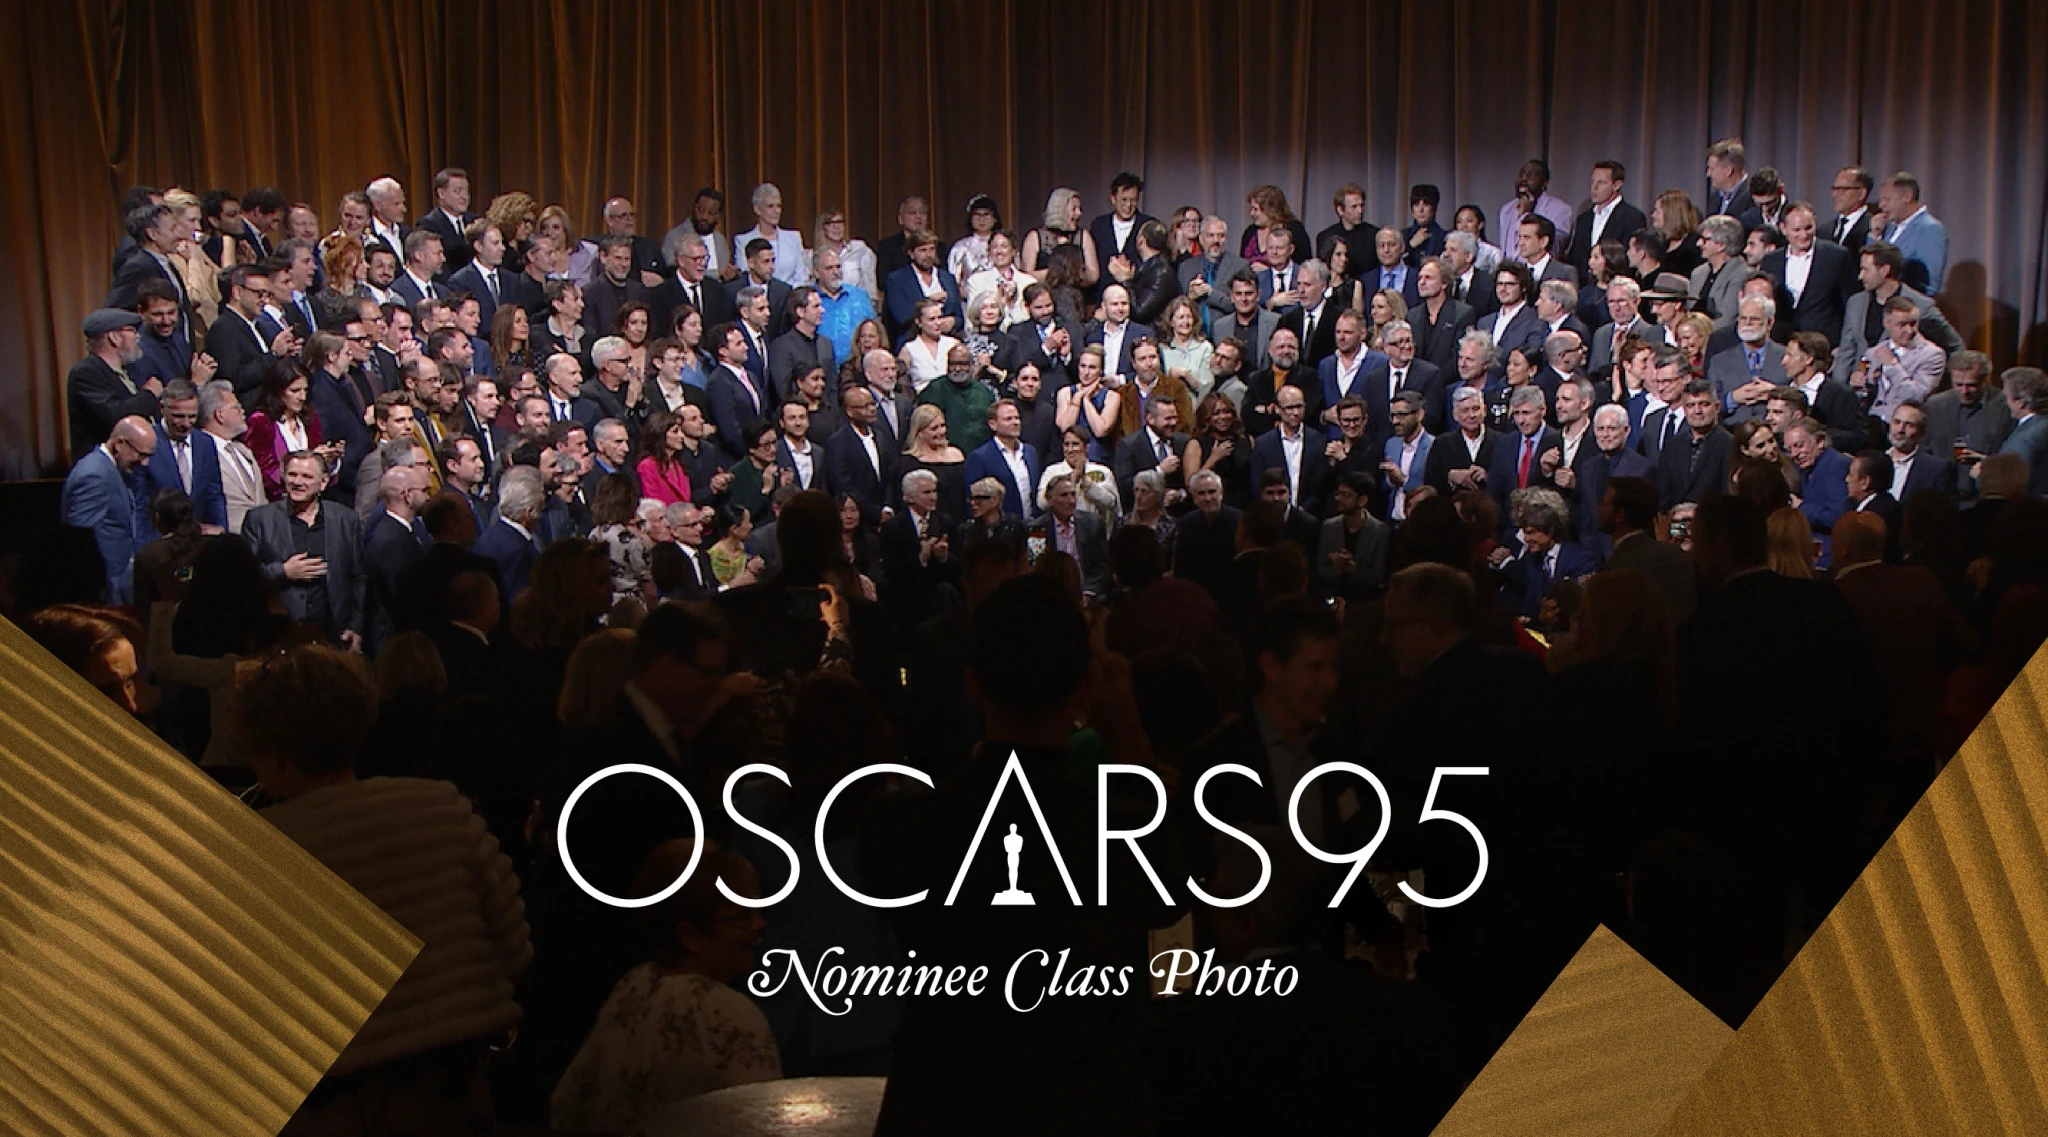 See the 2023 Oscar Nominees Class Photo